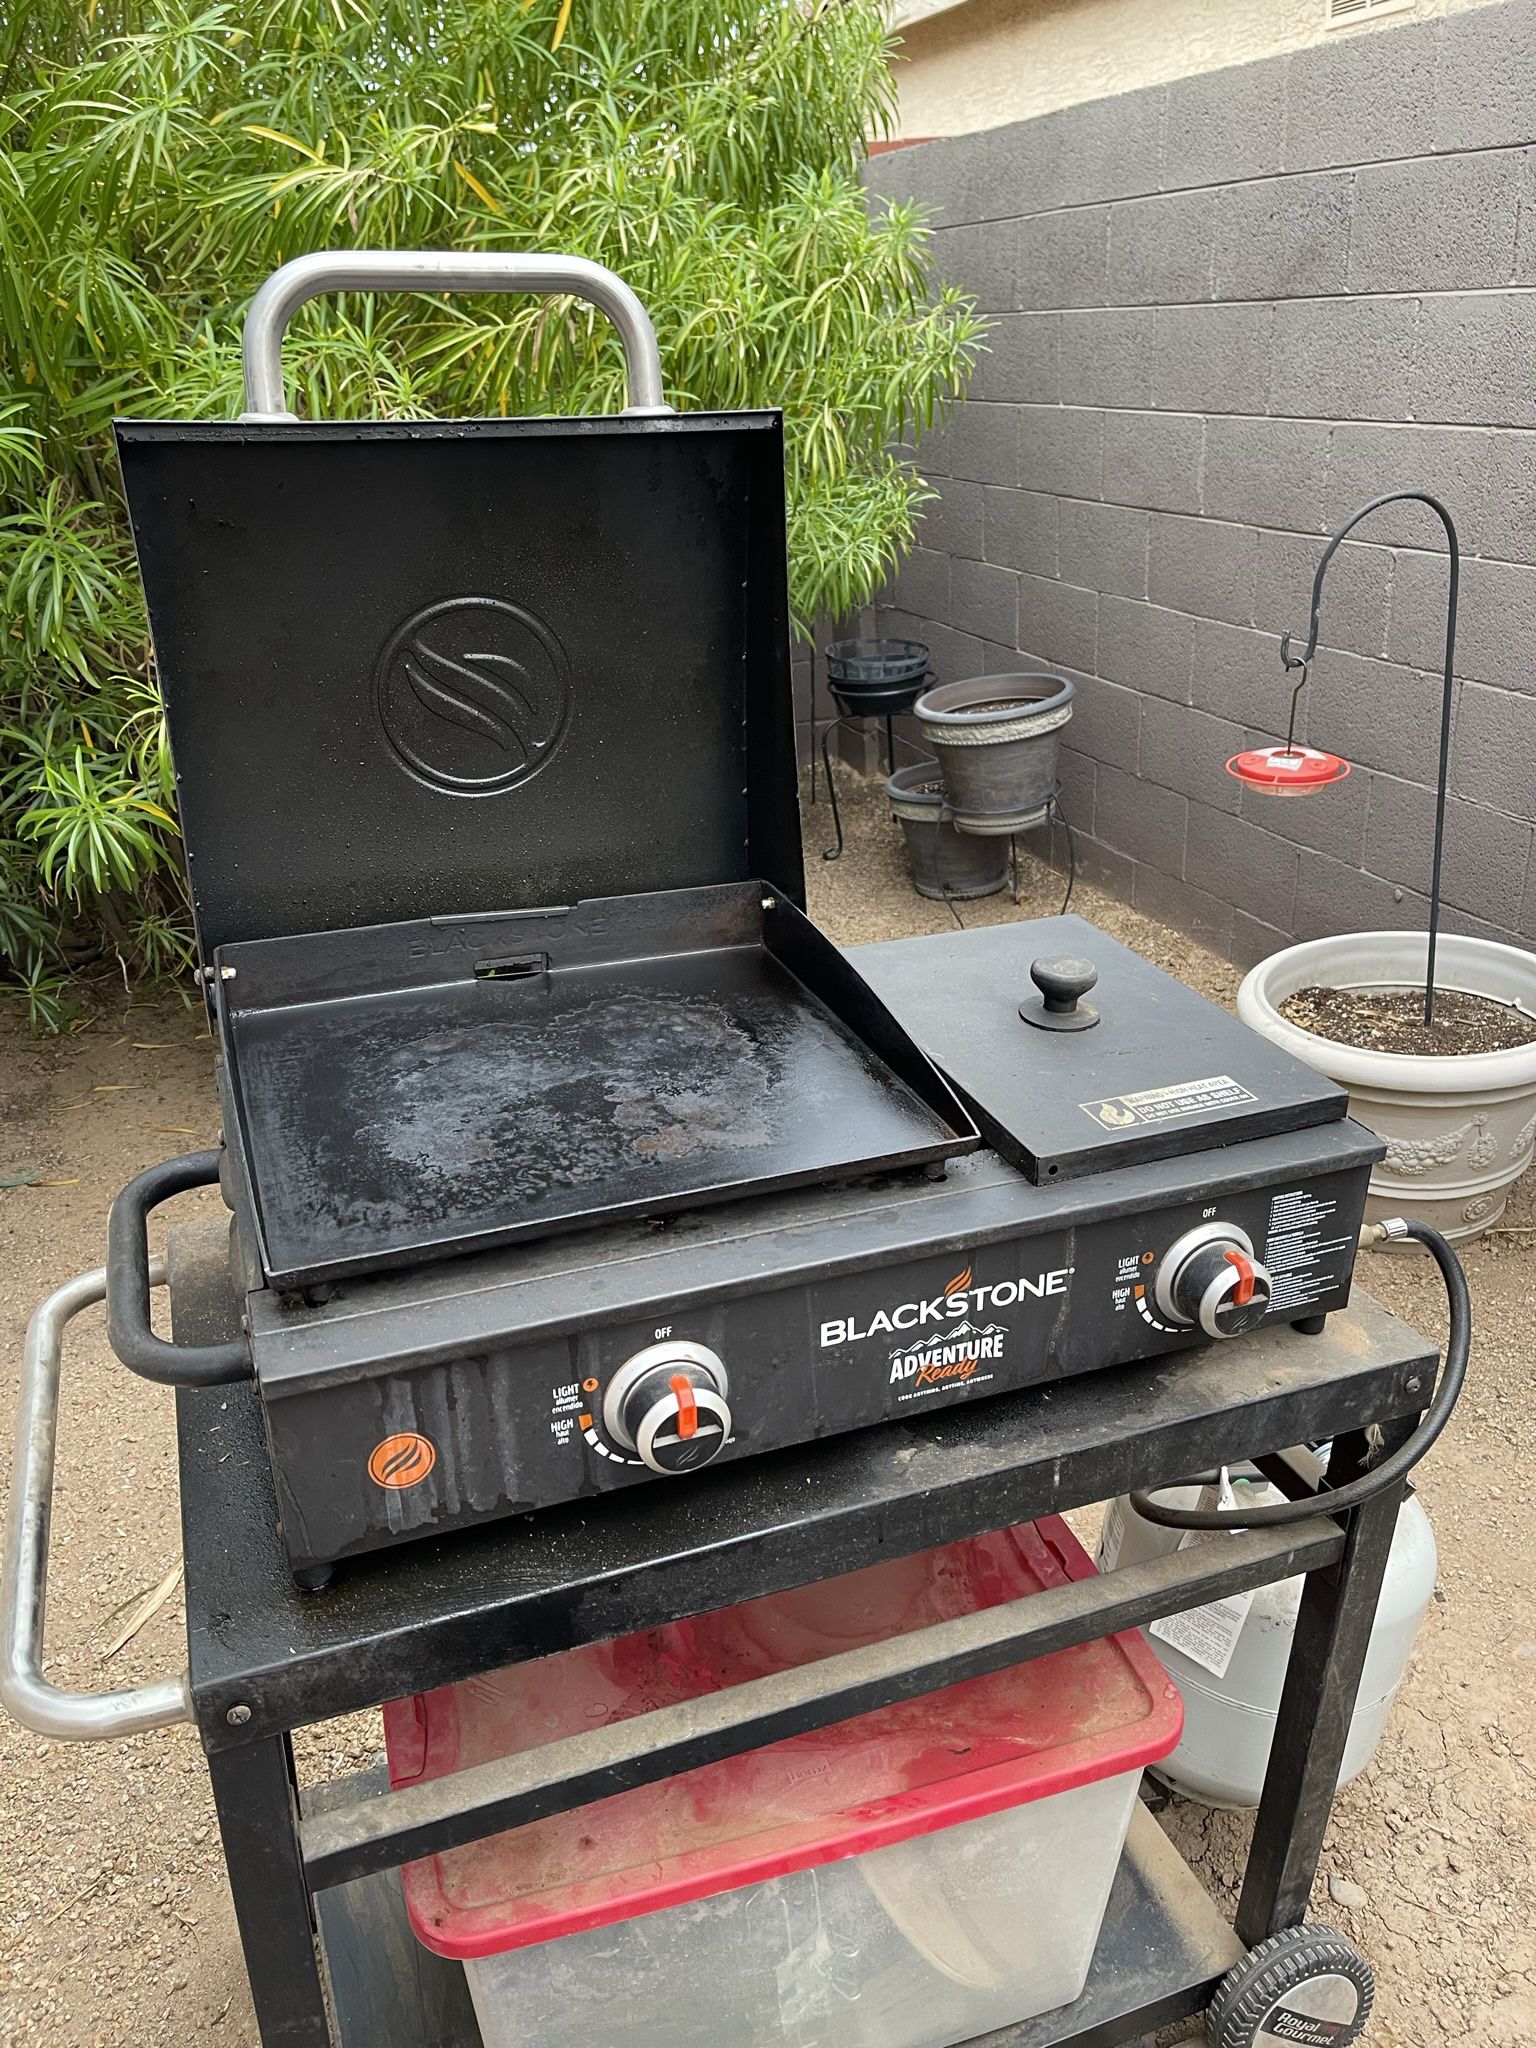 BRAND NEW BLACKSTONE 22 ELECTRIC GRIDDLE WITH PREP CART (PLANCHA PARA  TACOS ELÉCTRICA) for Sale in Addison, TX - OfferUp